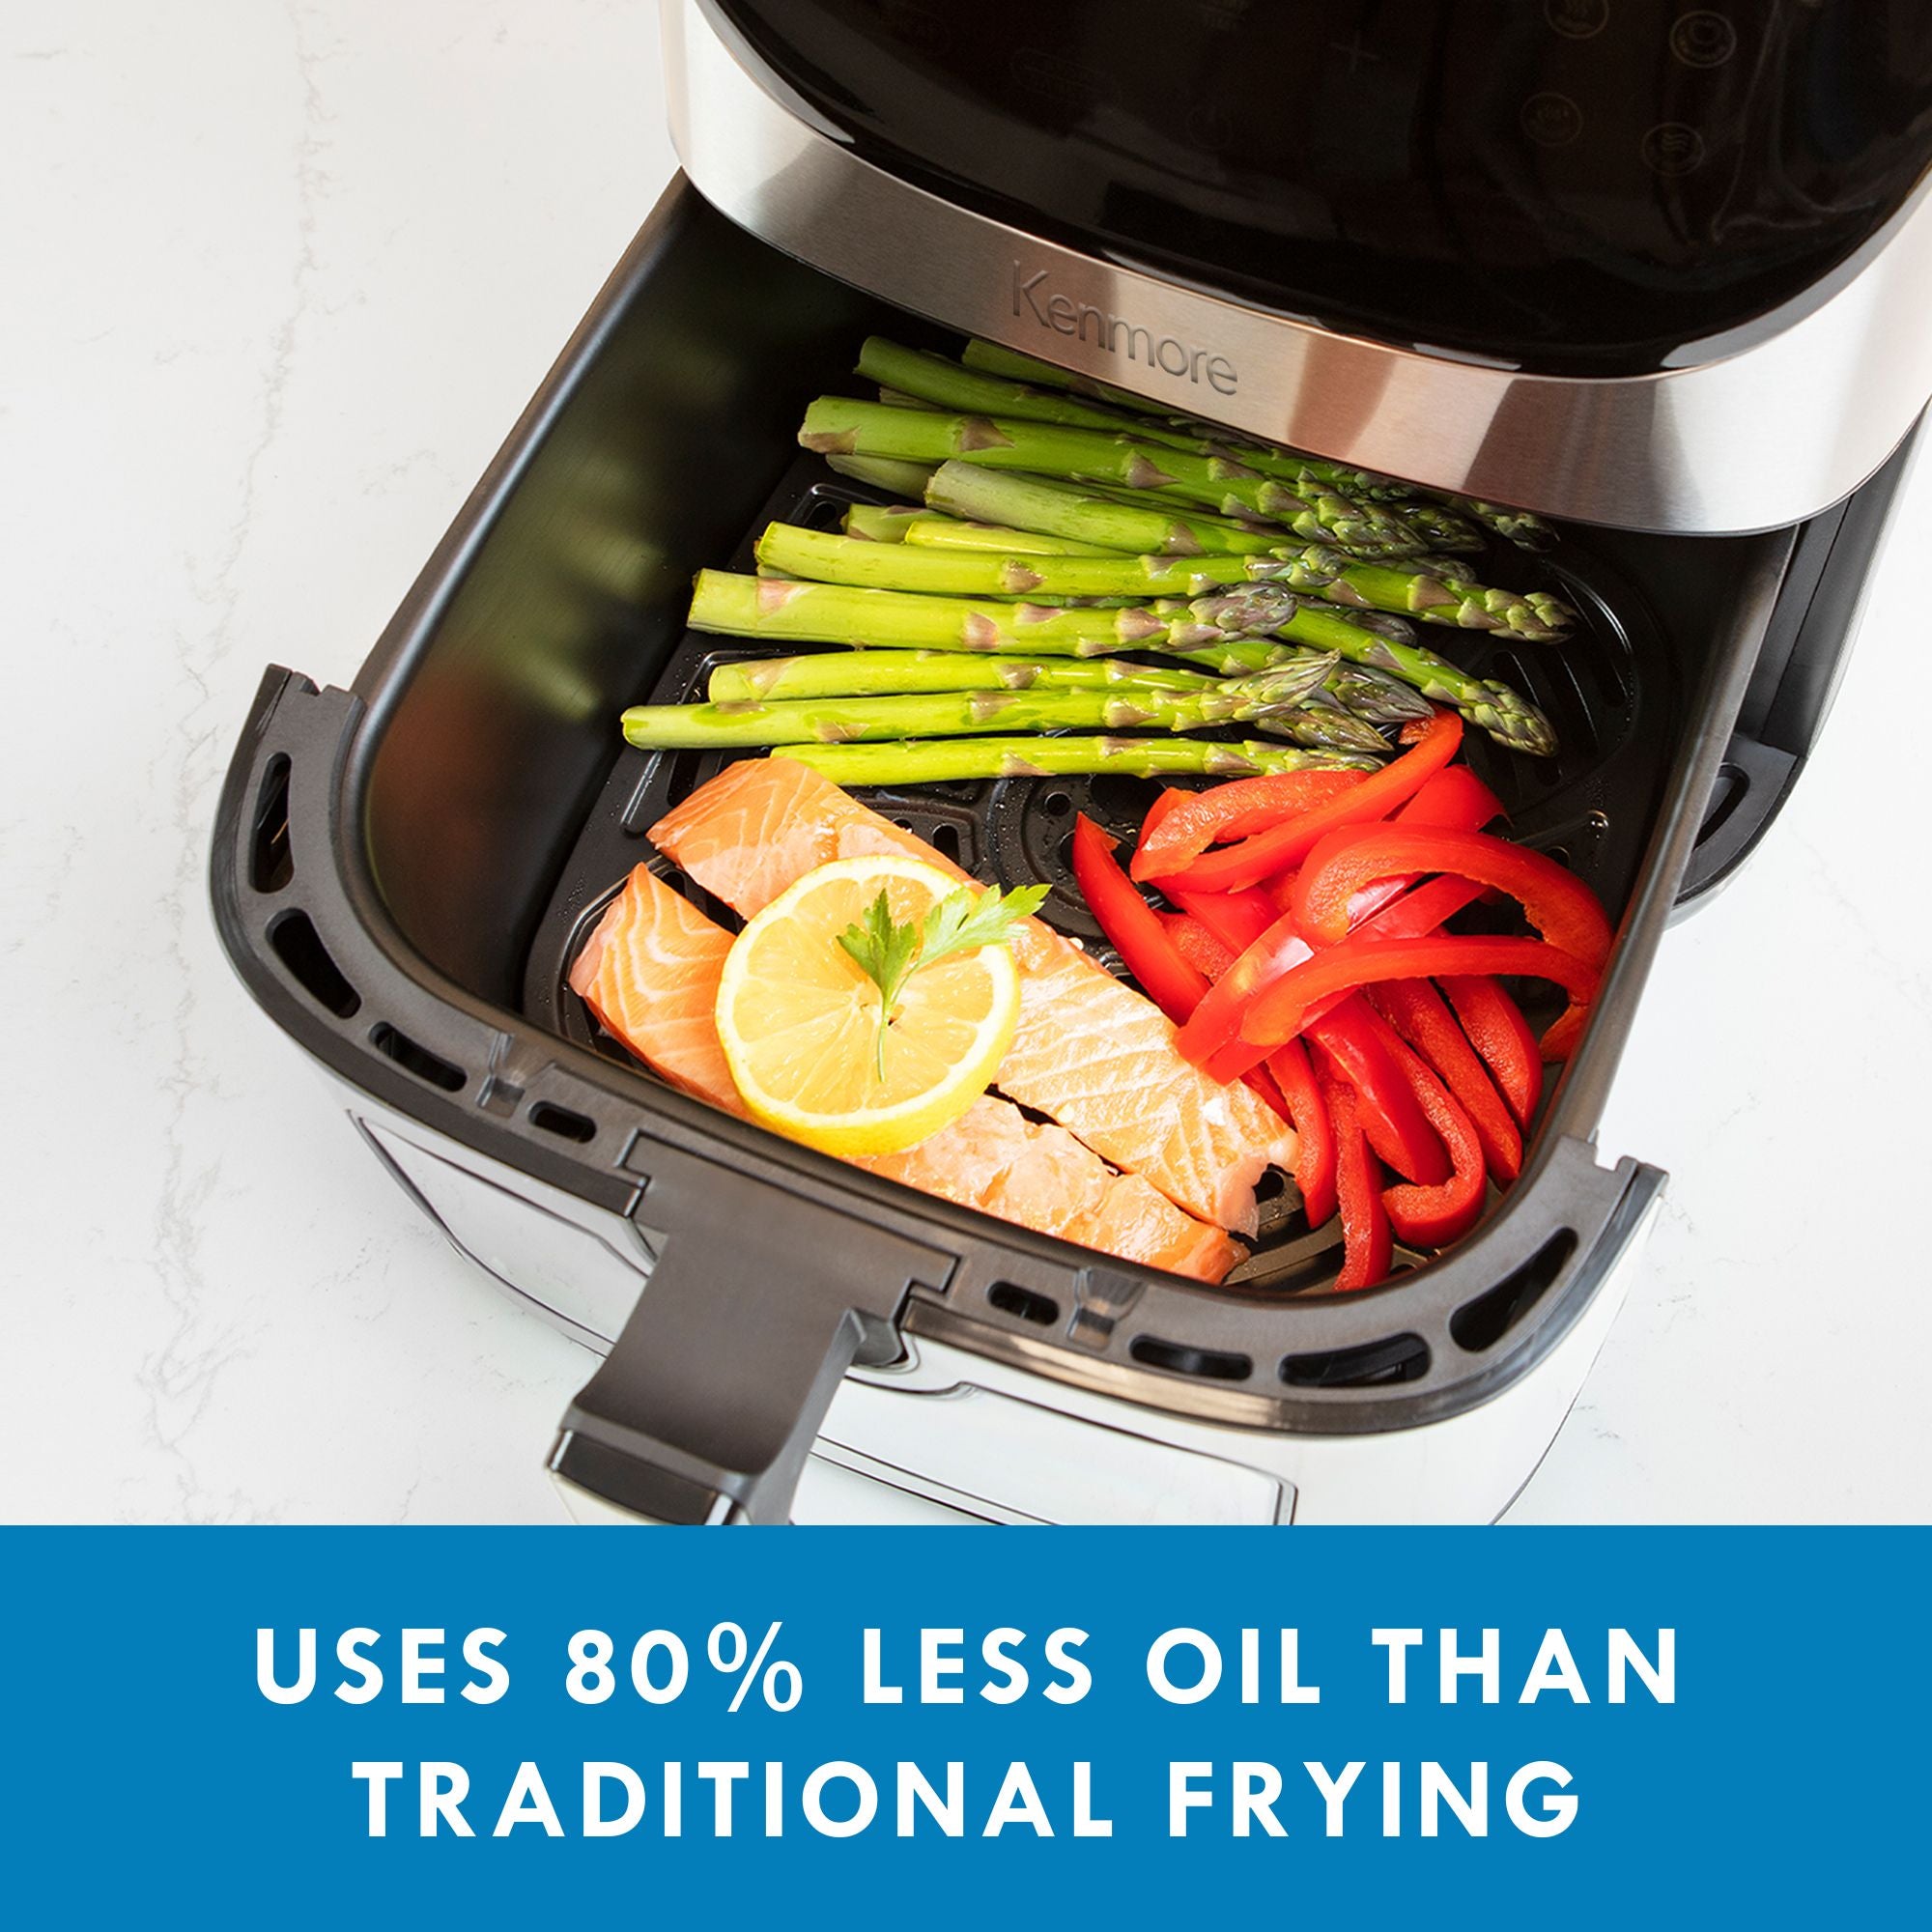 Closeup of air fryer basket containing a piece of salmon topped with a lemon slice, a bunch of asparagus spears, and sliced red peppers. Text below reads, "Uses 80% less oil than traditional frying."